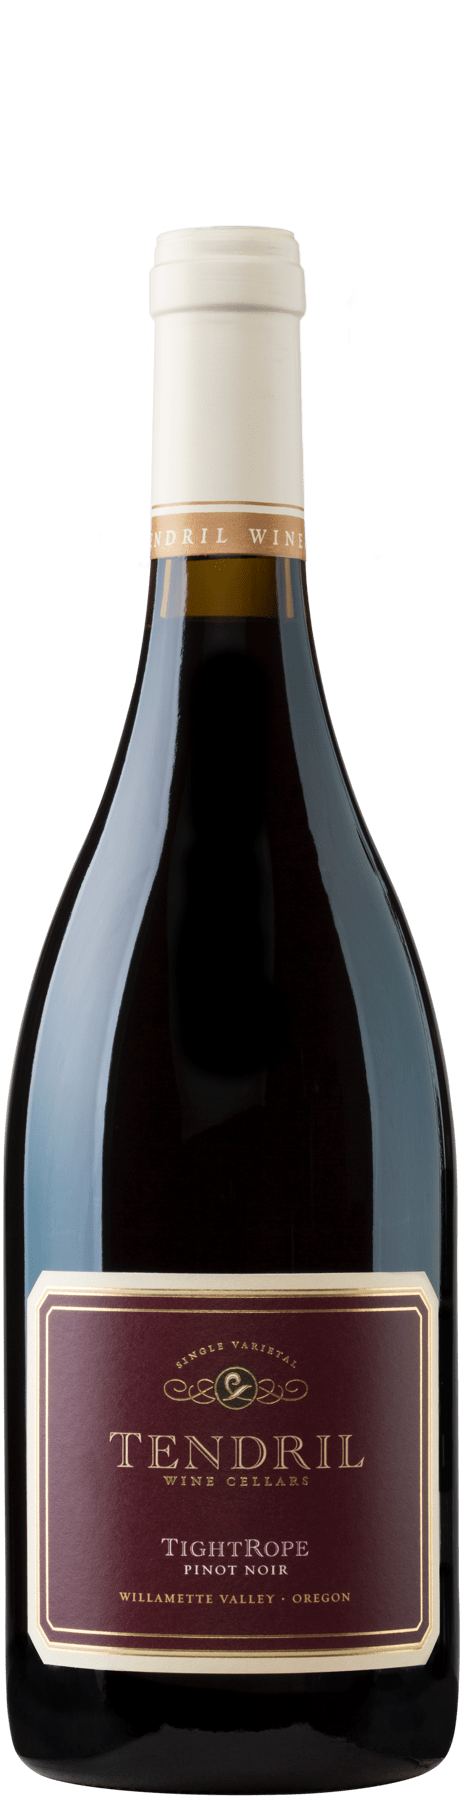 Tendril TightRope Pinot noir 2018